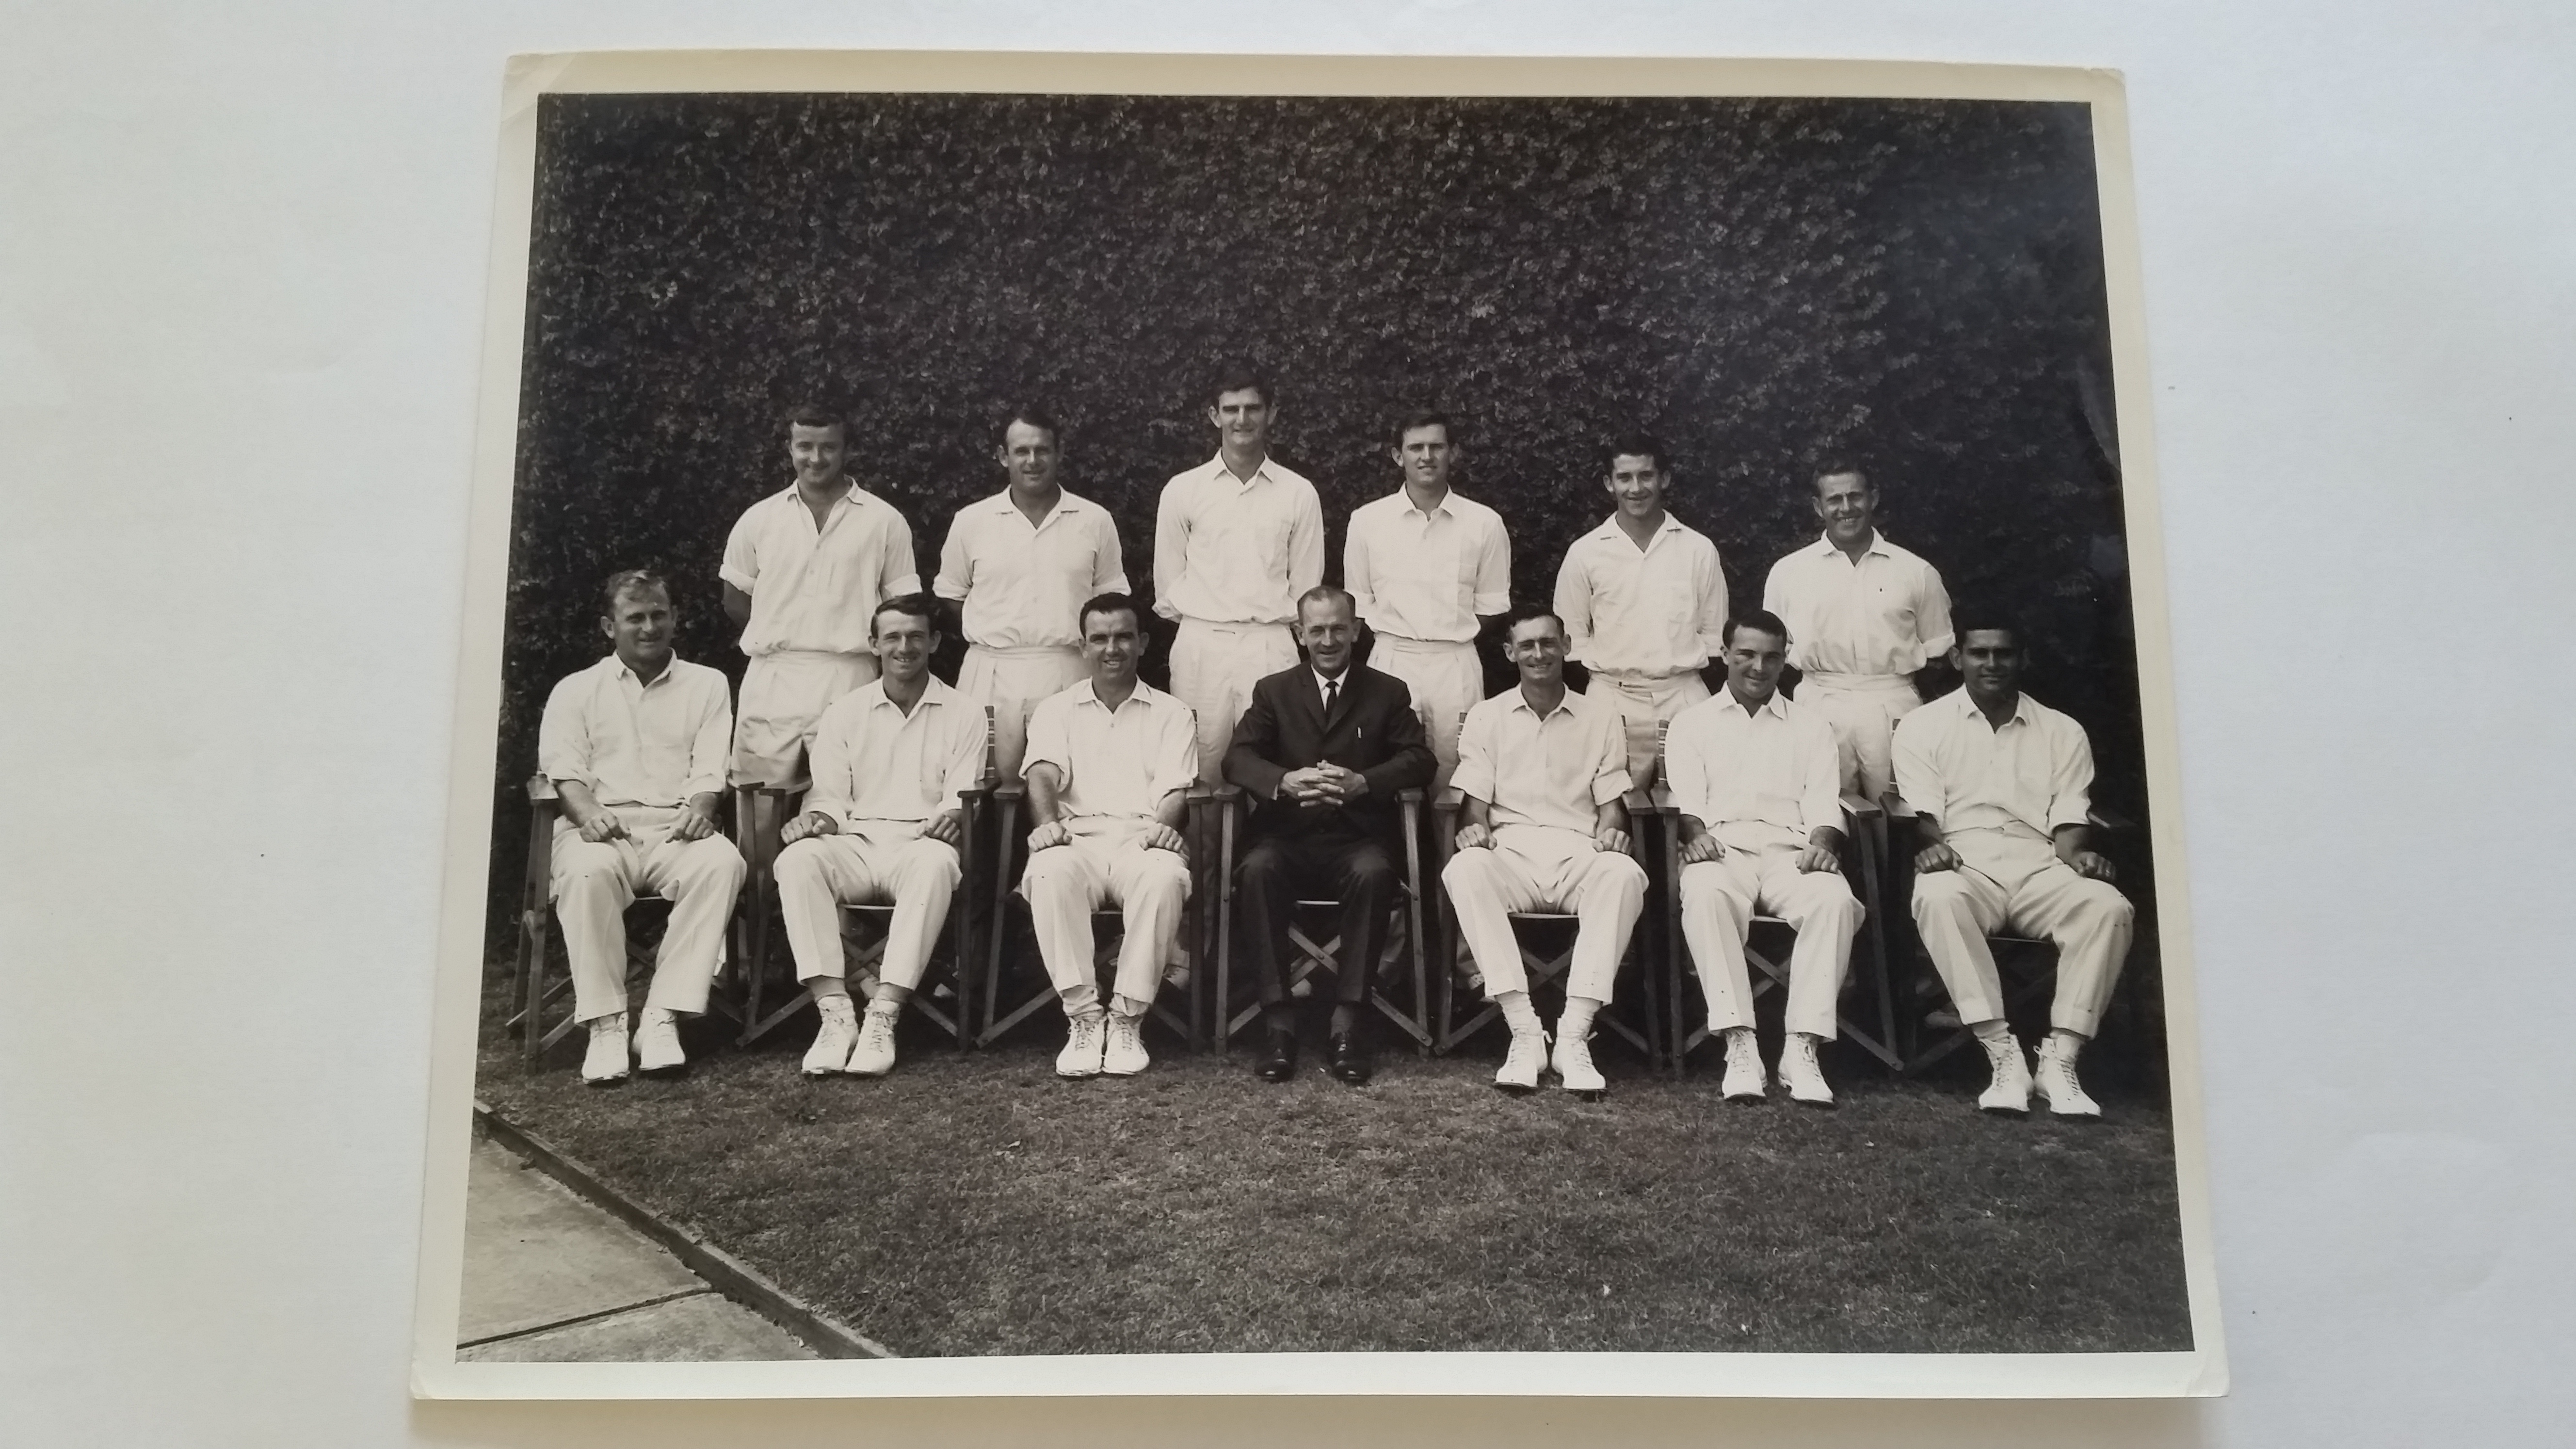 CRICKET, press photo of 1965 New South Wales team, for match at Melbourne, agency stamp to back (